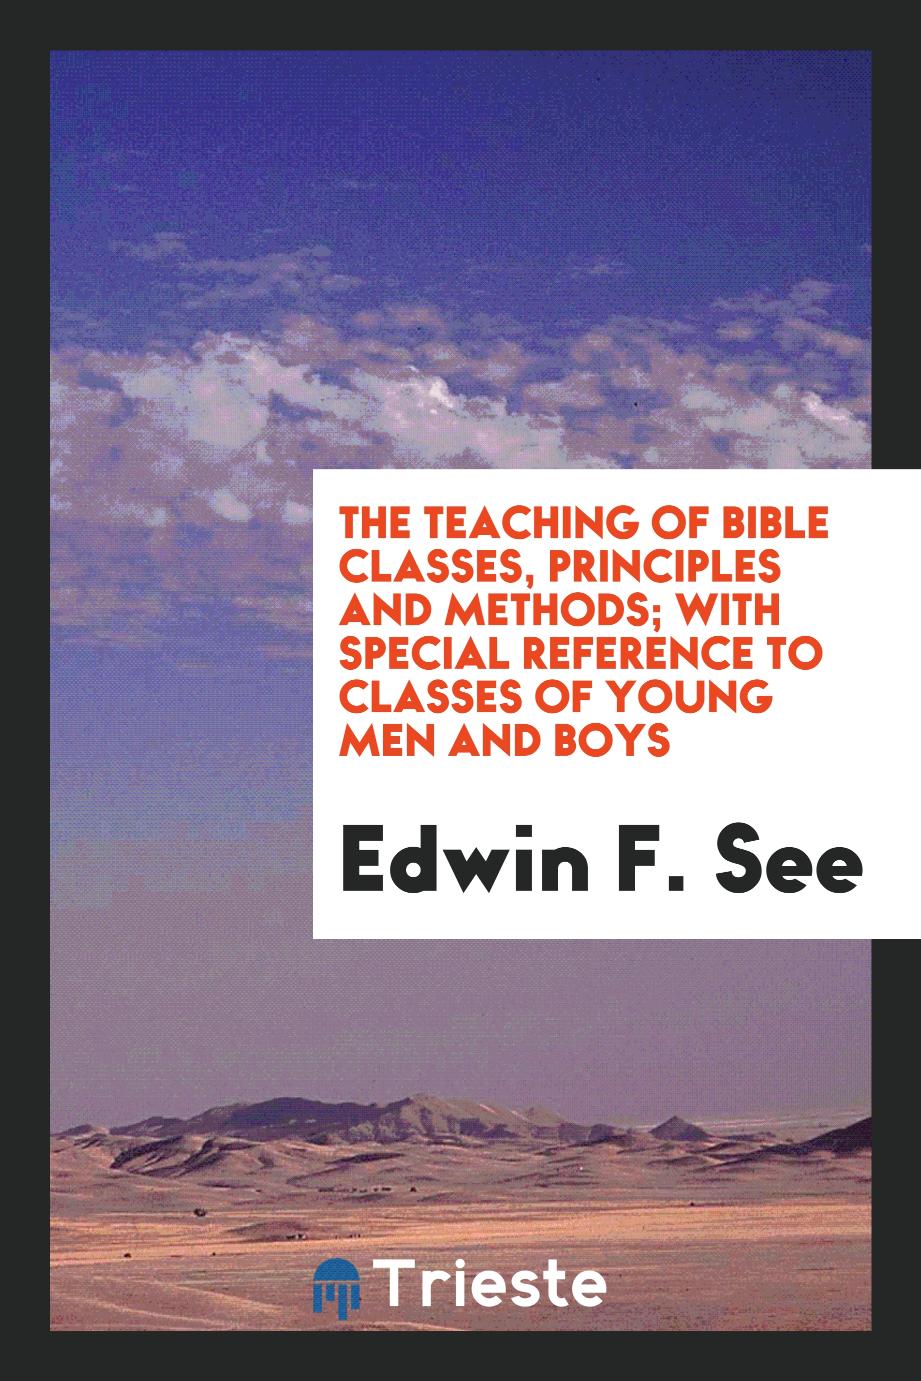 The teaching of Bible classes, principles and methods; with special reference to classes of young men and boys